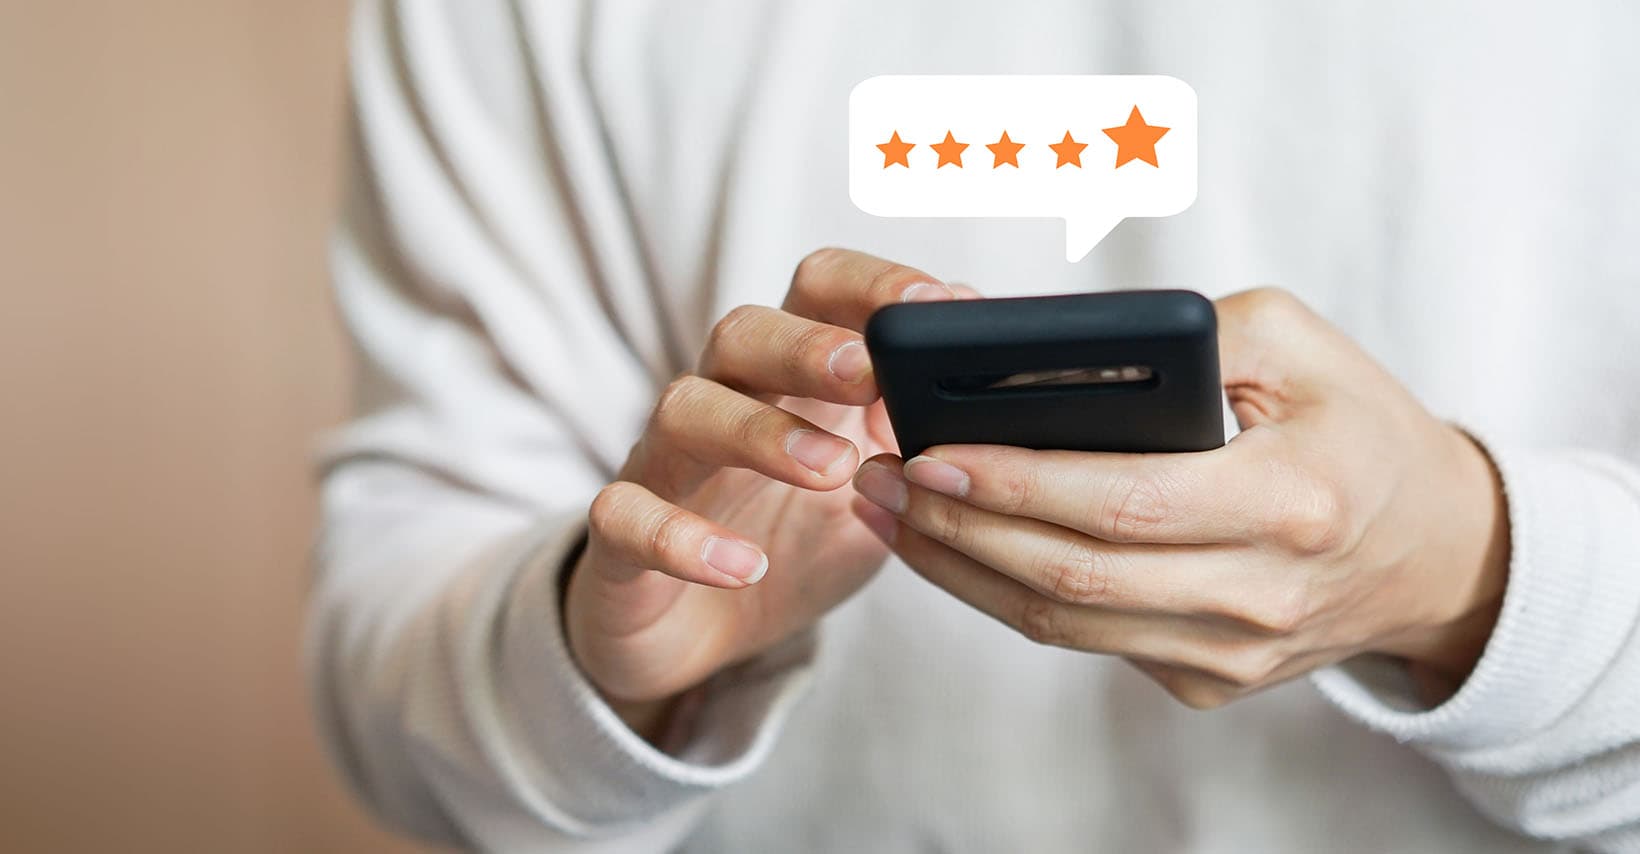 How online consumer reviews impact the future of sustainable practice